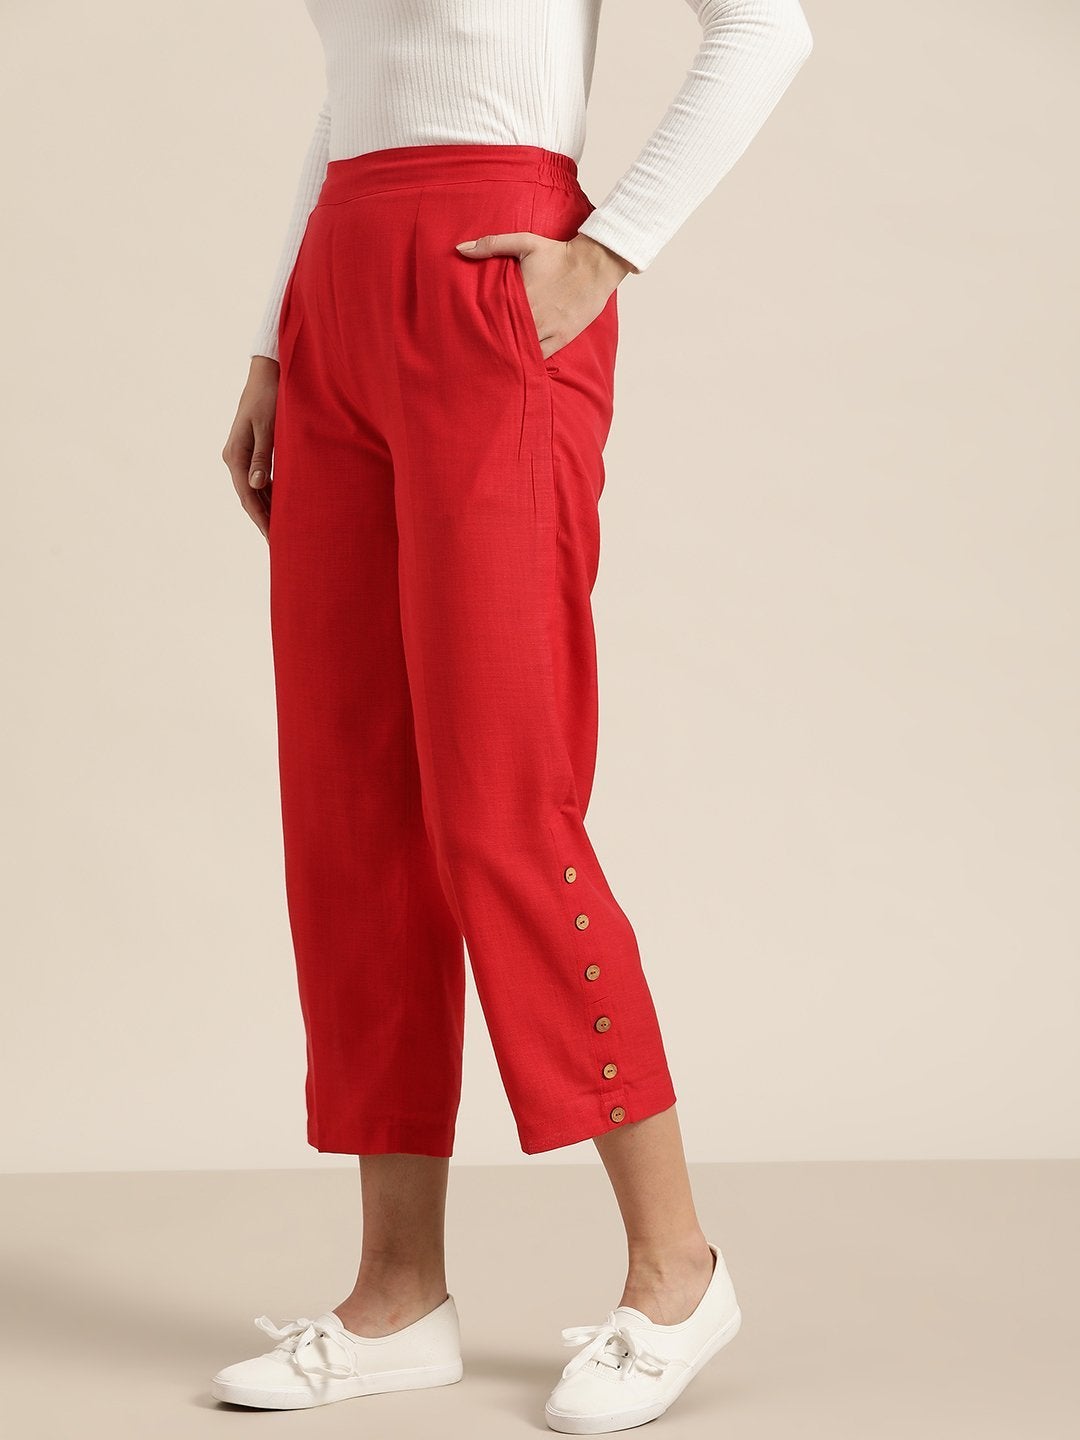 Women's Red Side Button Placket Pants - SHAE